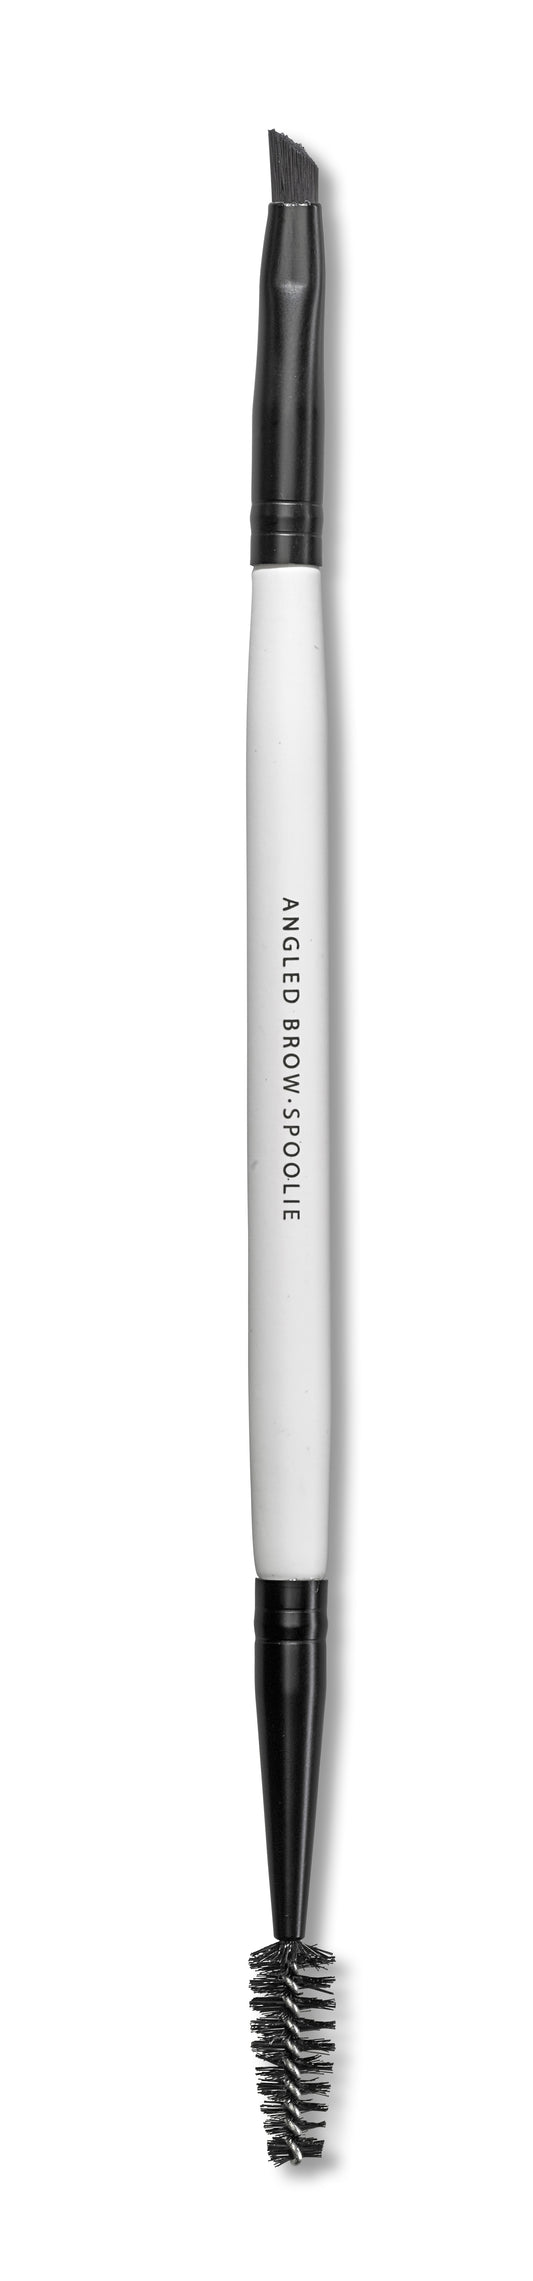 LILY LOLO - Angled Brow - Spoolie Brush - 1st